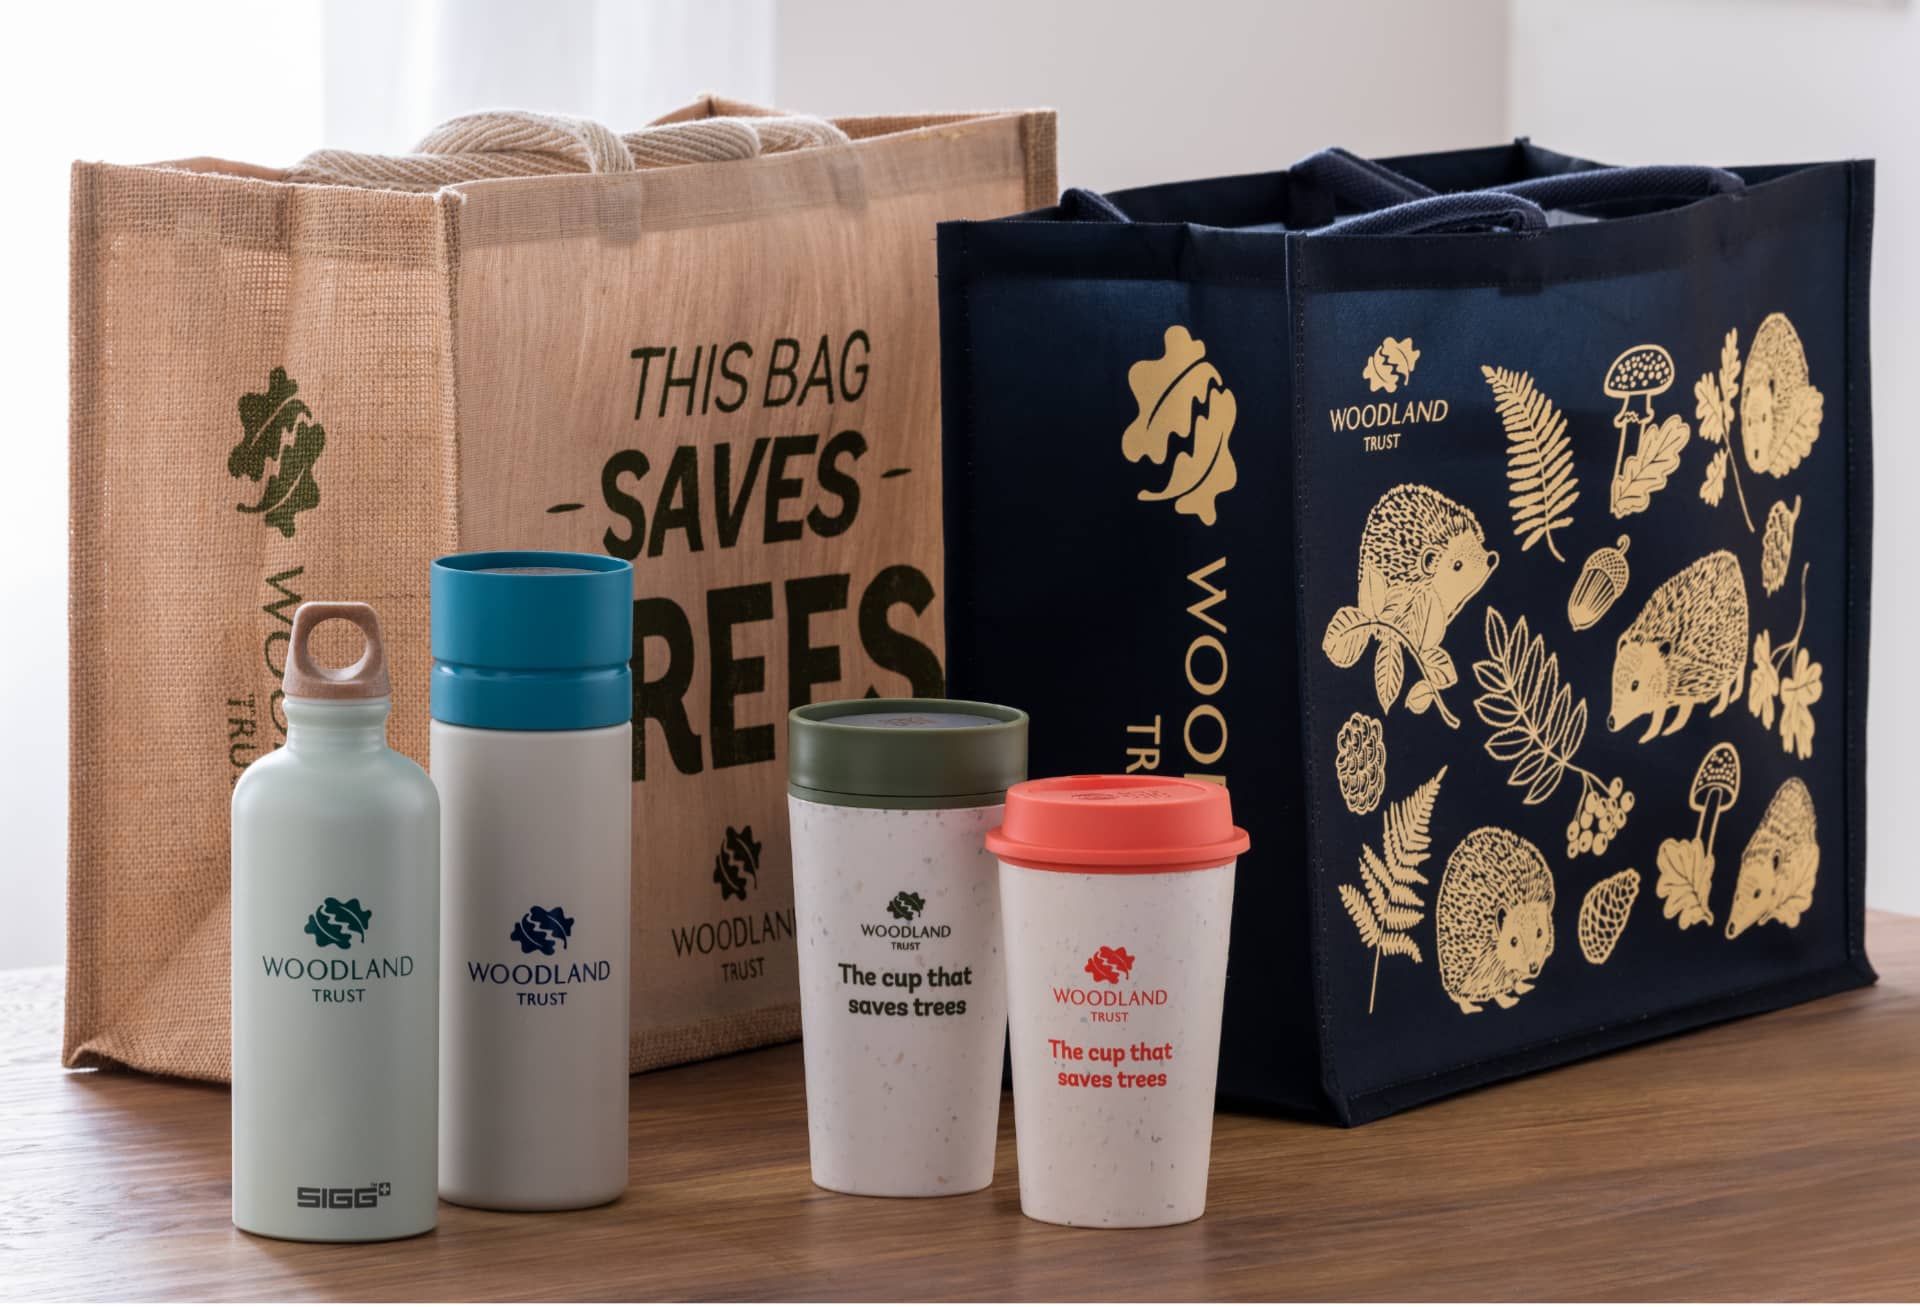 Woodland Trust Shopping bags and bottles